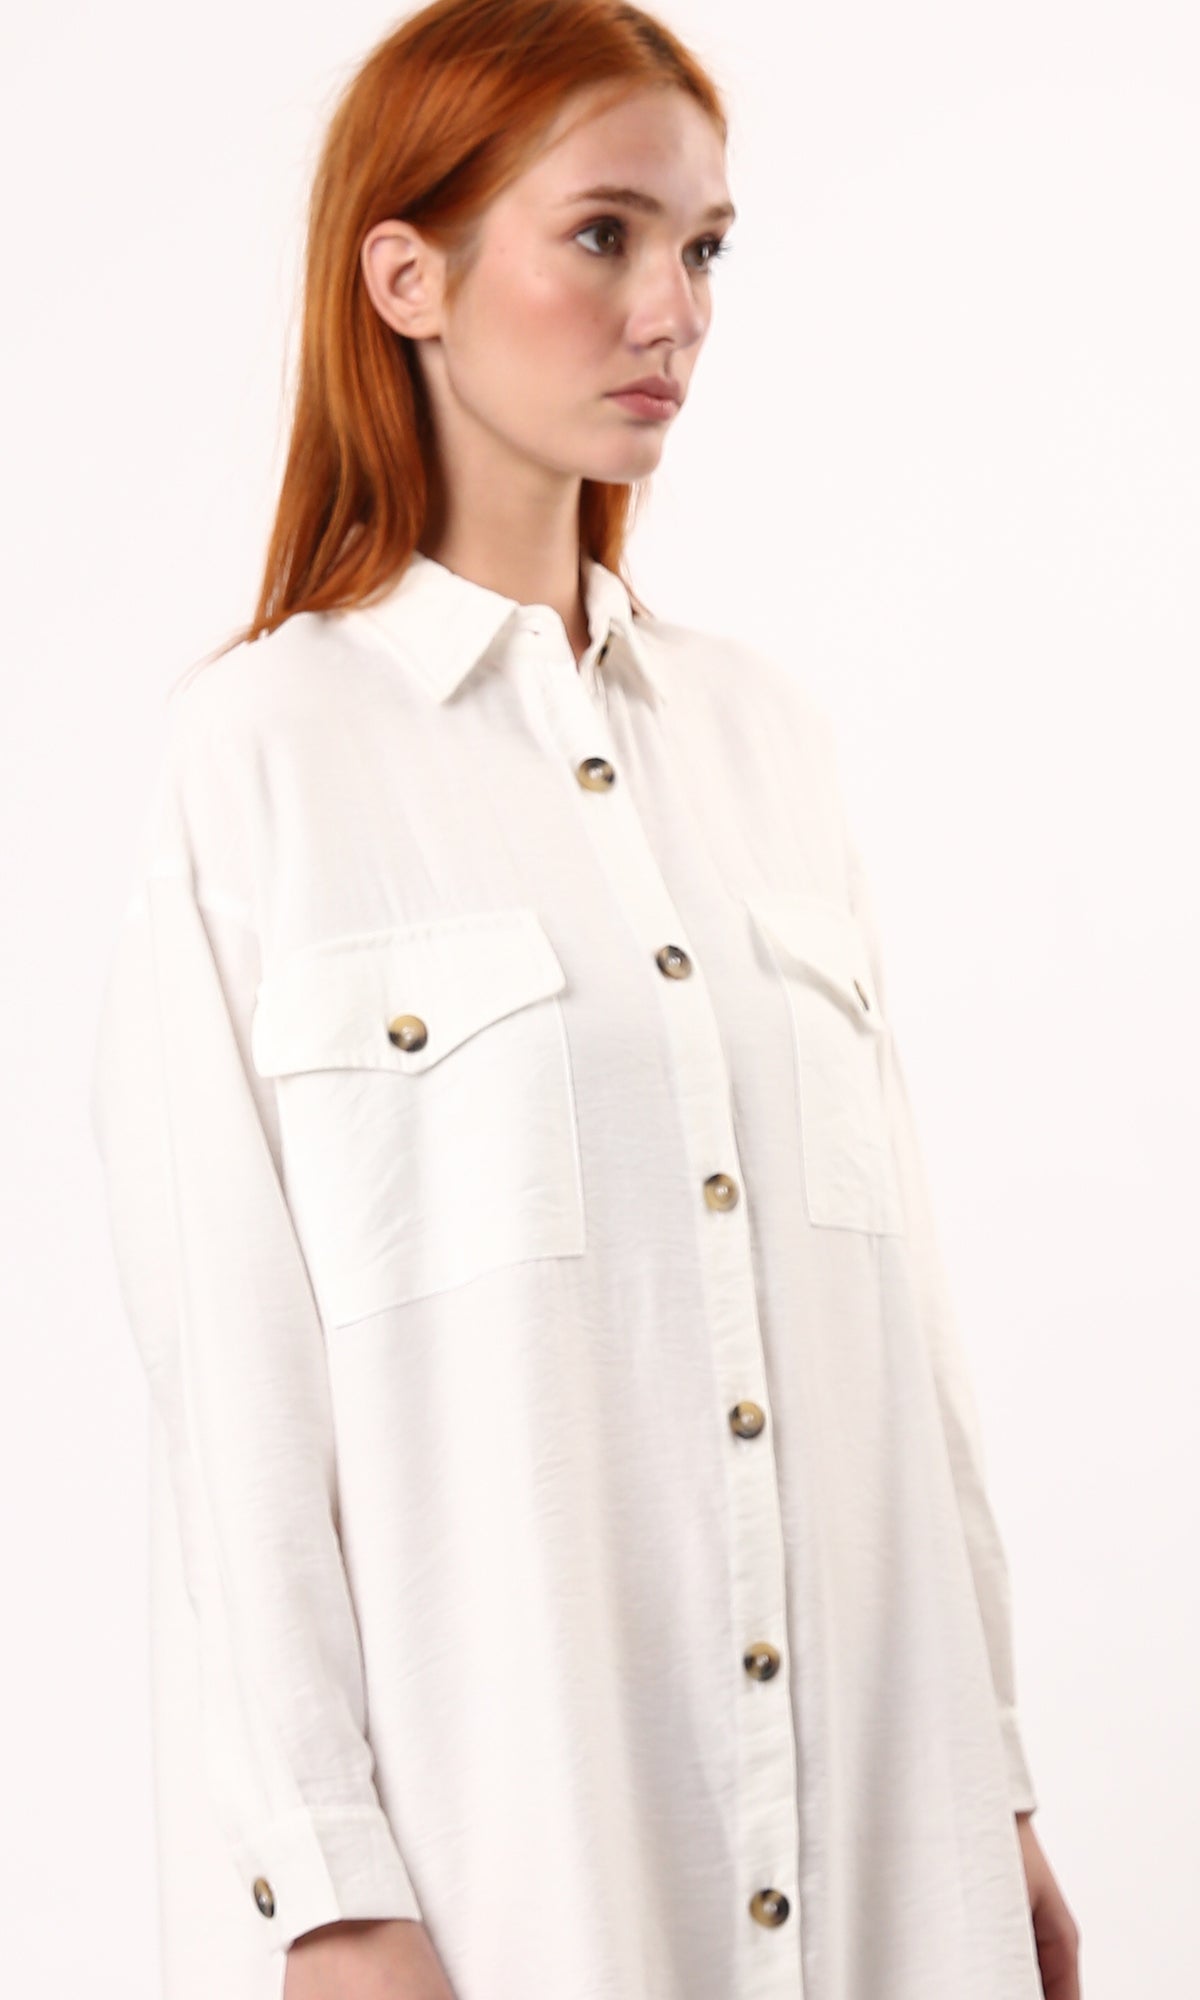 O179833 Long Sleeves Buttoned Off-White Shirt Dress